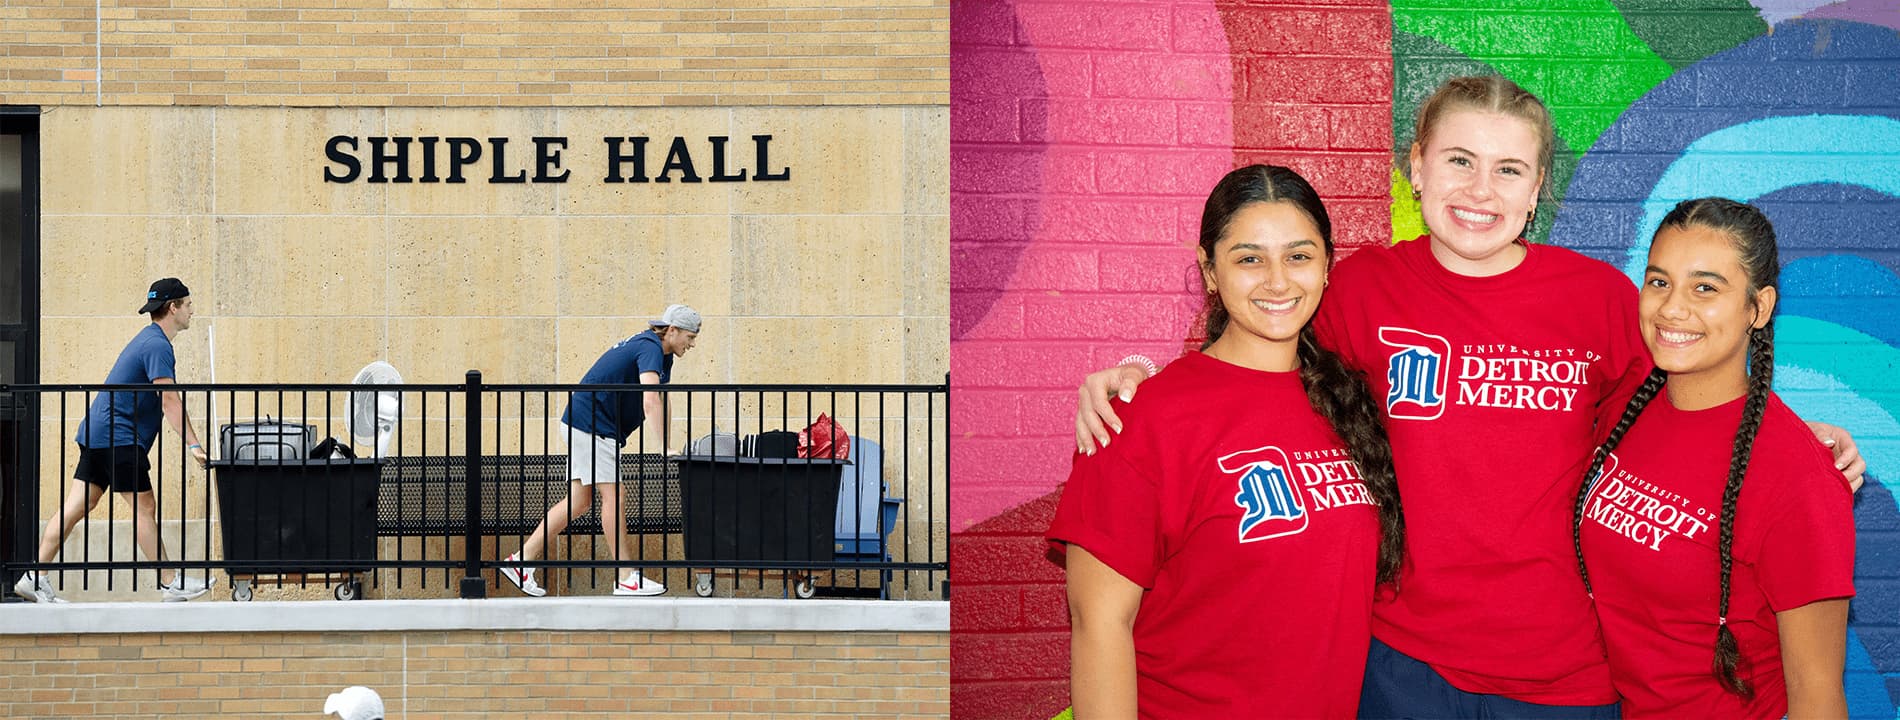 Two photos of students outdoors, on the left two students push carts past the Shiple Hall sign and on the right, three students wearing red University of Detroit Mercy t-shirts pose and smile in front of a colorful brick wall.